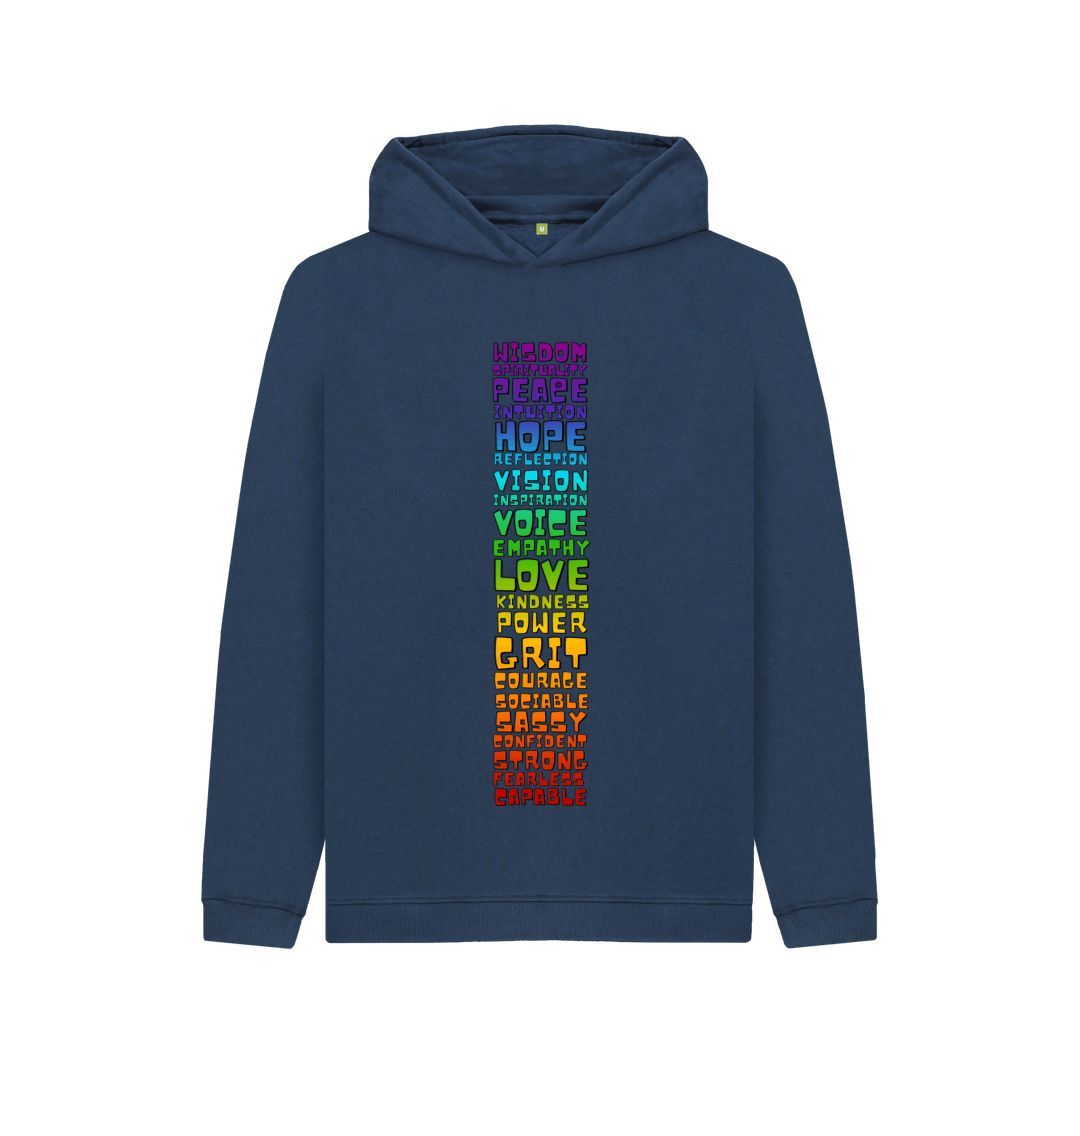 Navy Blue Youth Hoodie - Chakra Words to Empower